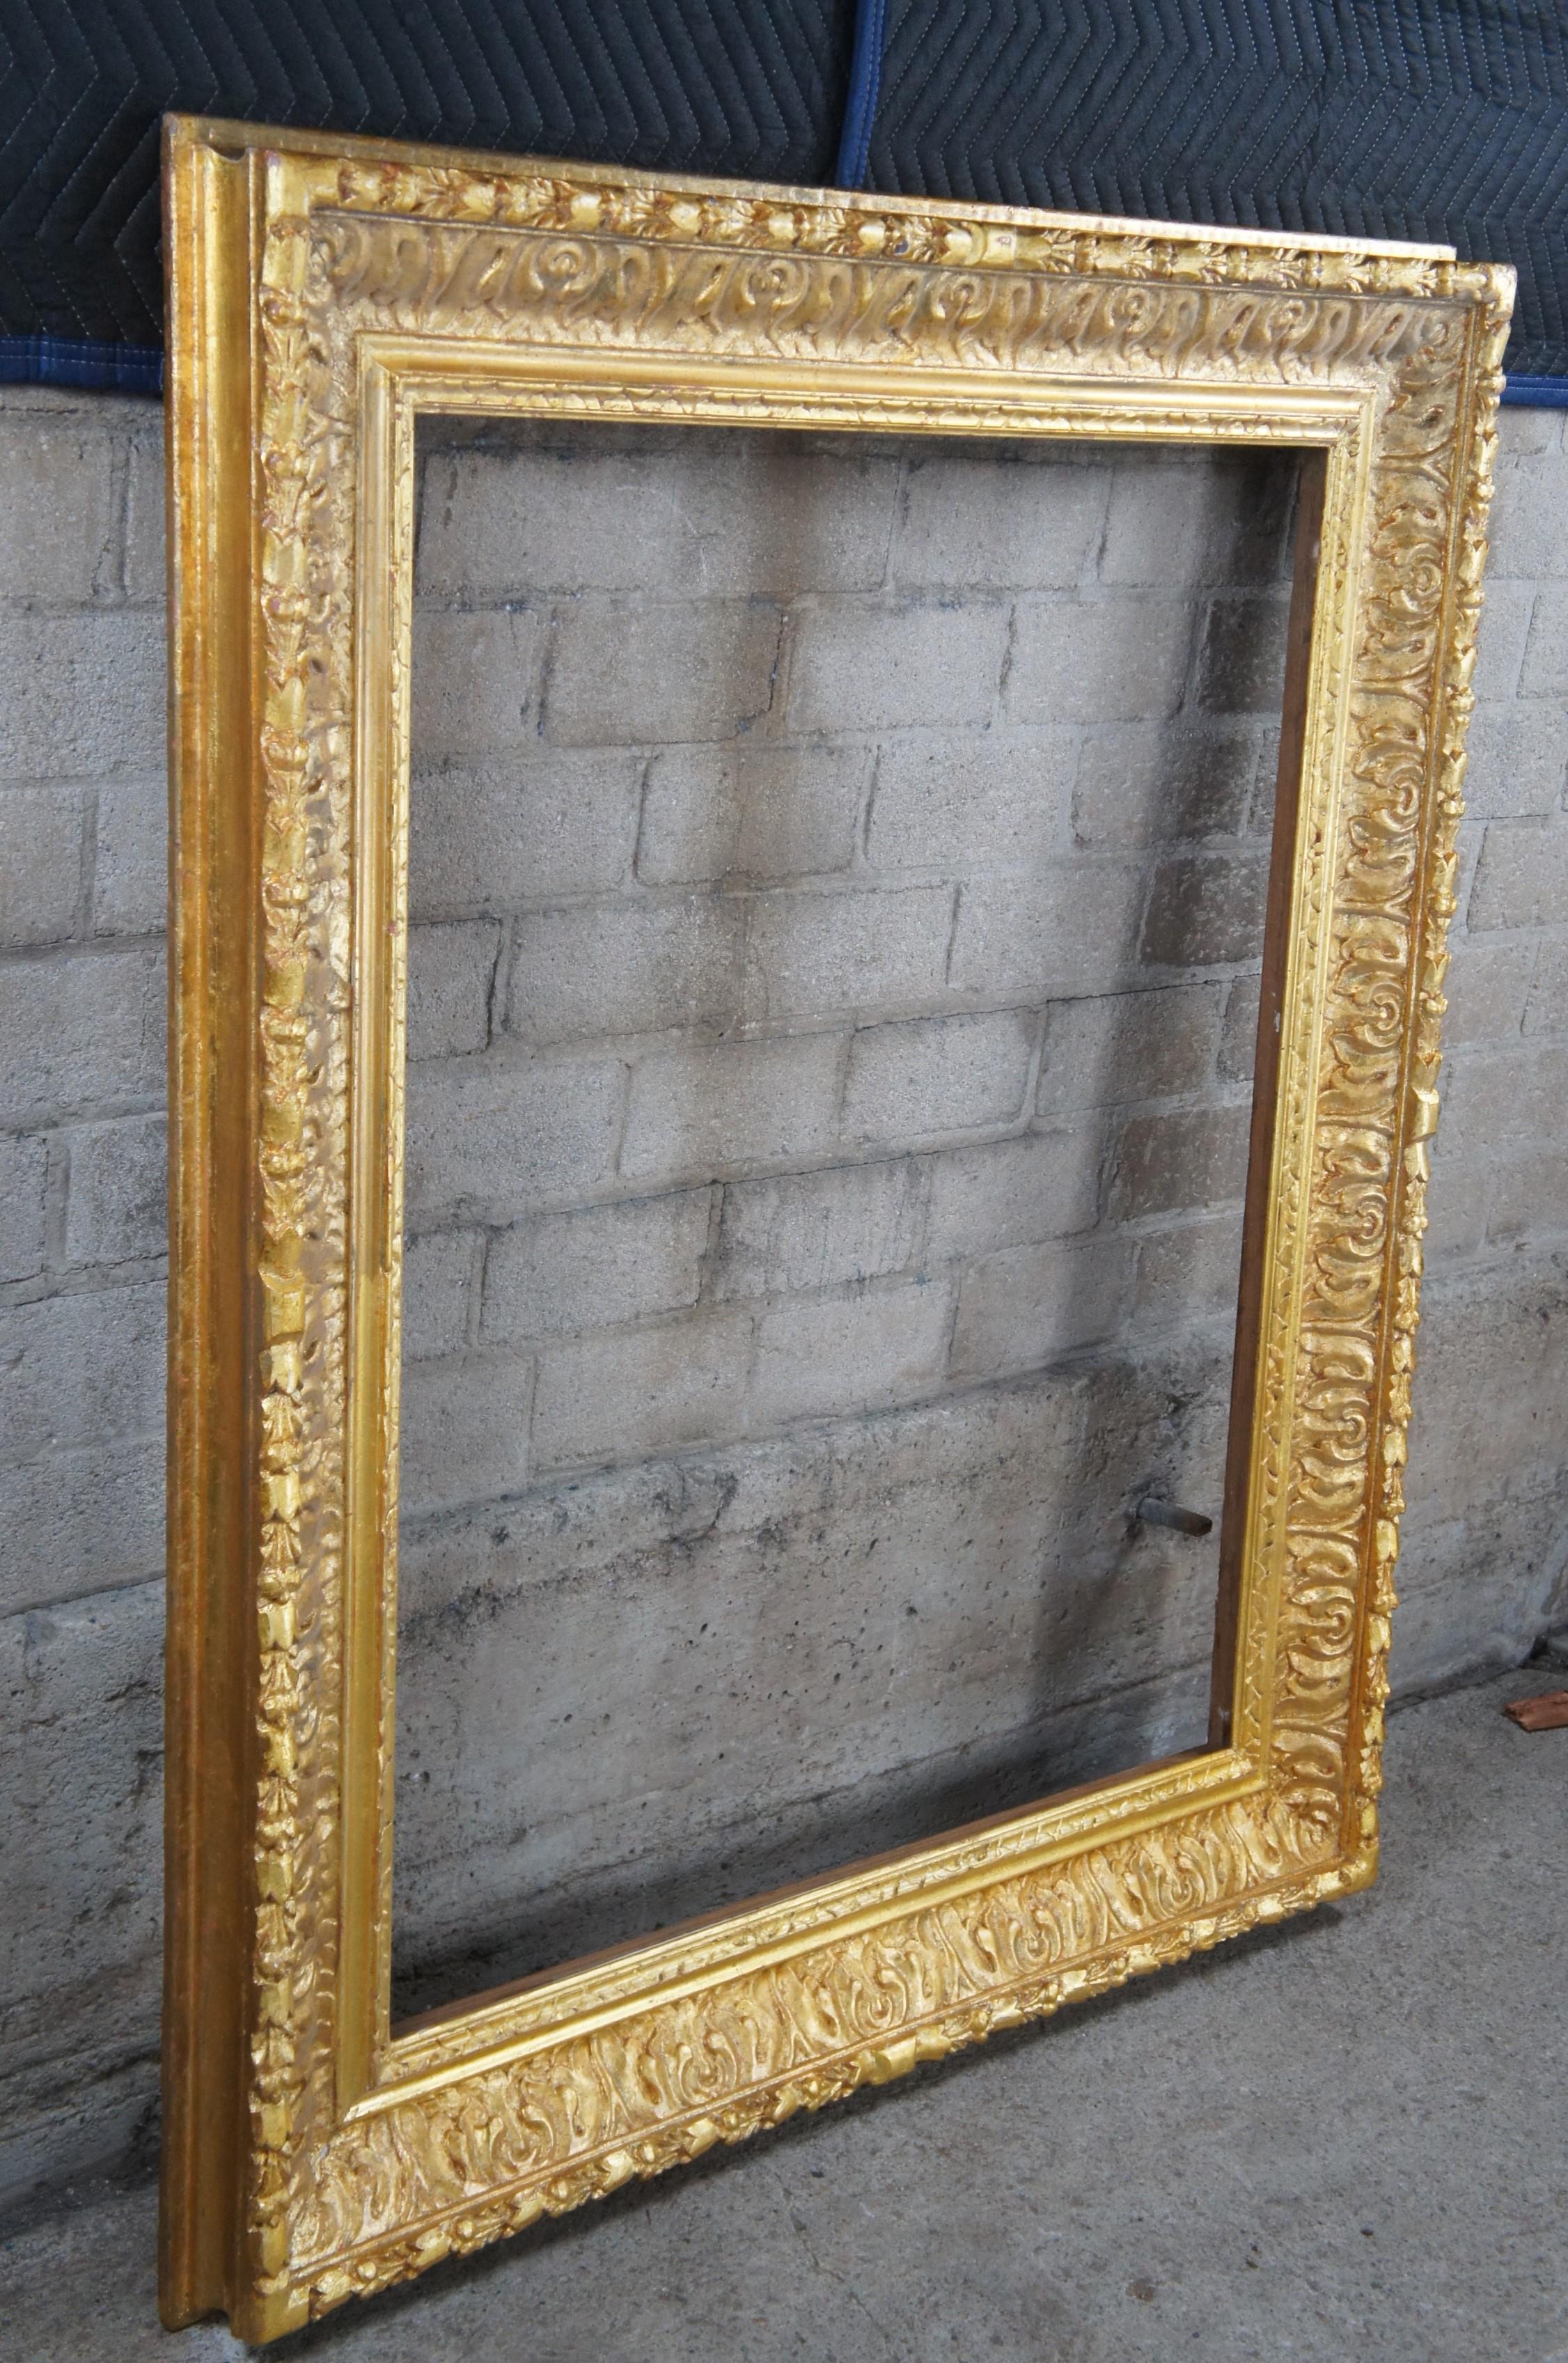 20th Century Large Impressive Antique Carved Gold Gilded Picture Art Mirror Frame 53